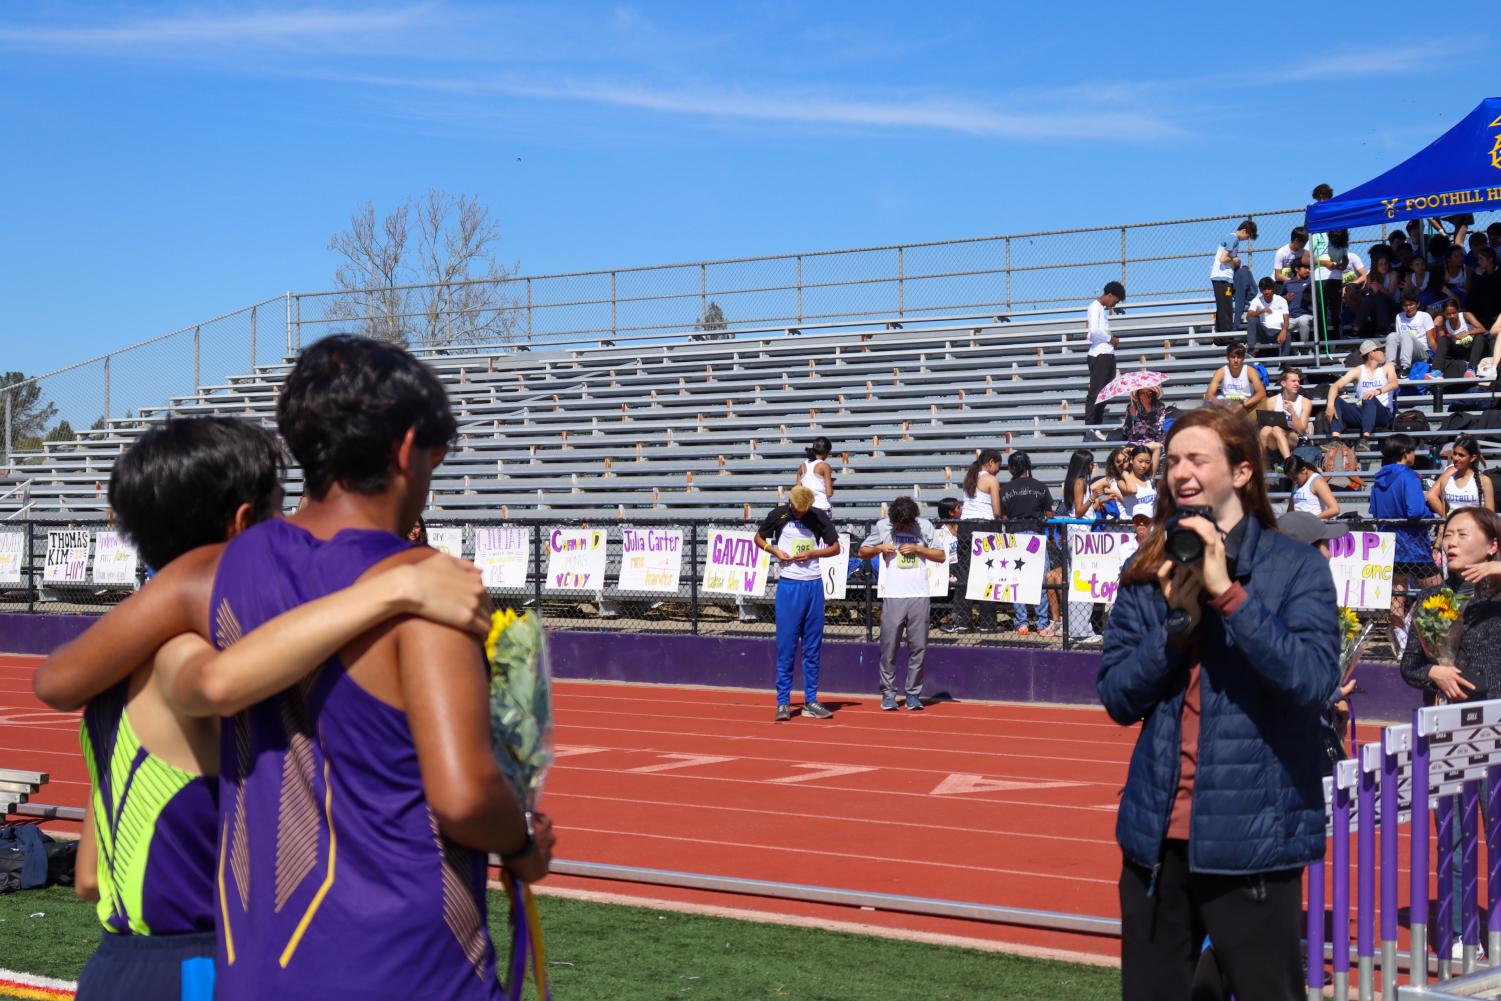 Amador+Valley+Track+%26+Field+competes+against+Foothill+on+senior+night